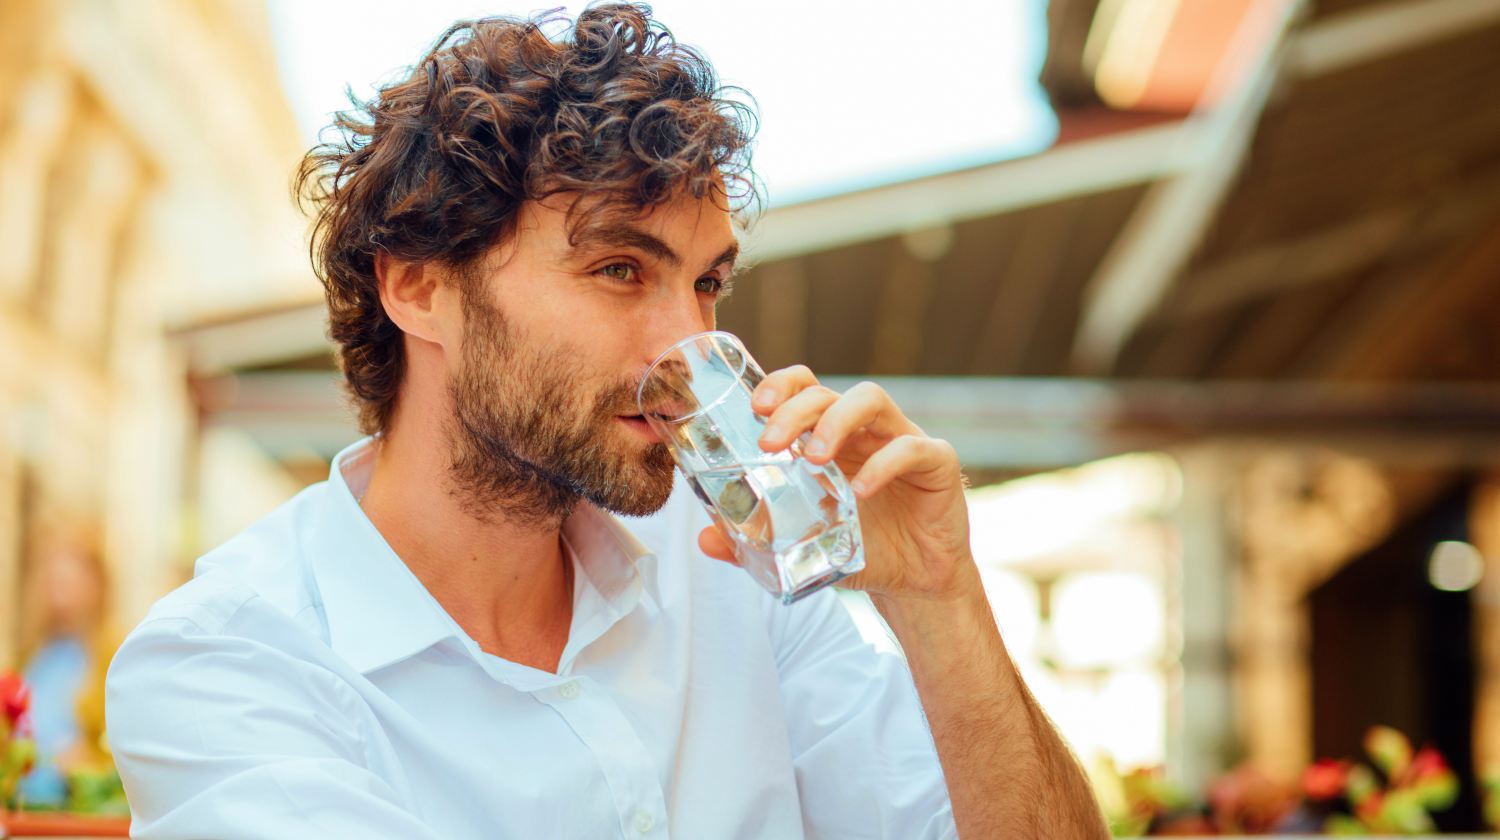 Feature | man drinking water | Why You Should Manage Your Fluid Intake To Treat Constipation | liquid intake